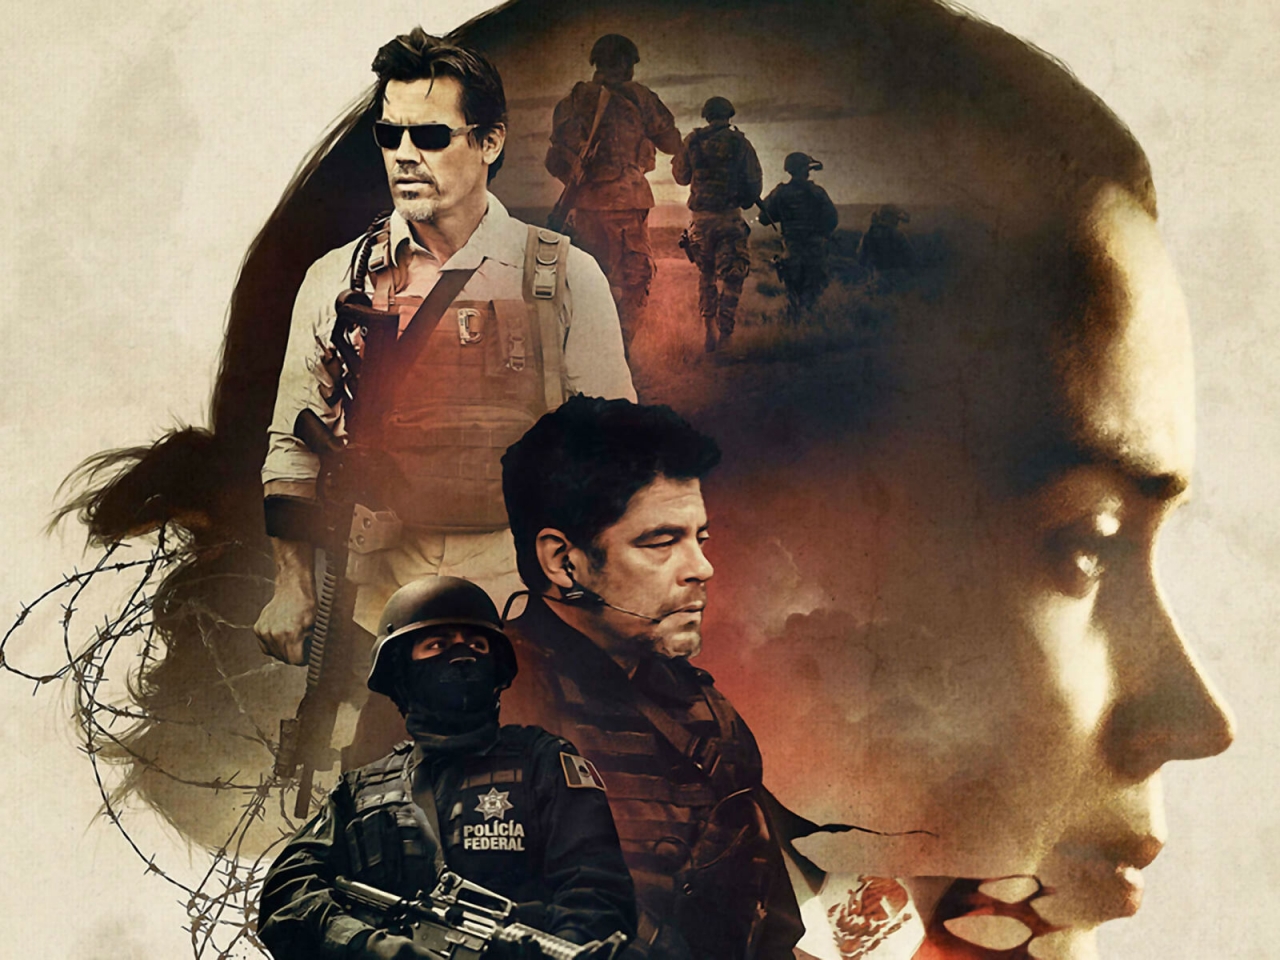 Sicario Movie Poster for 1280 x 960 resolution